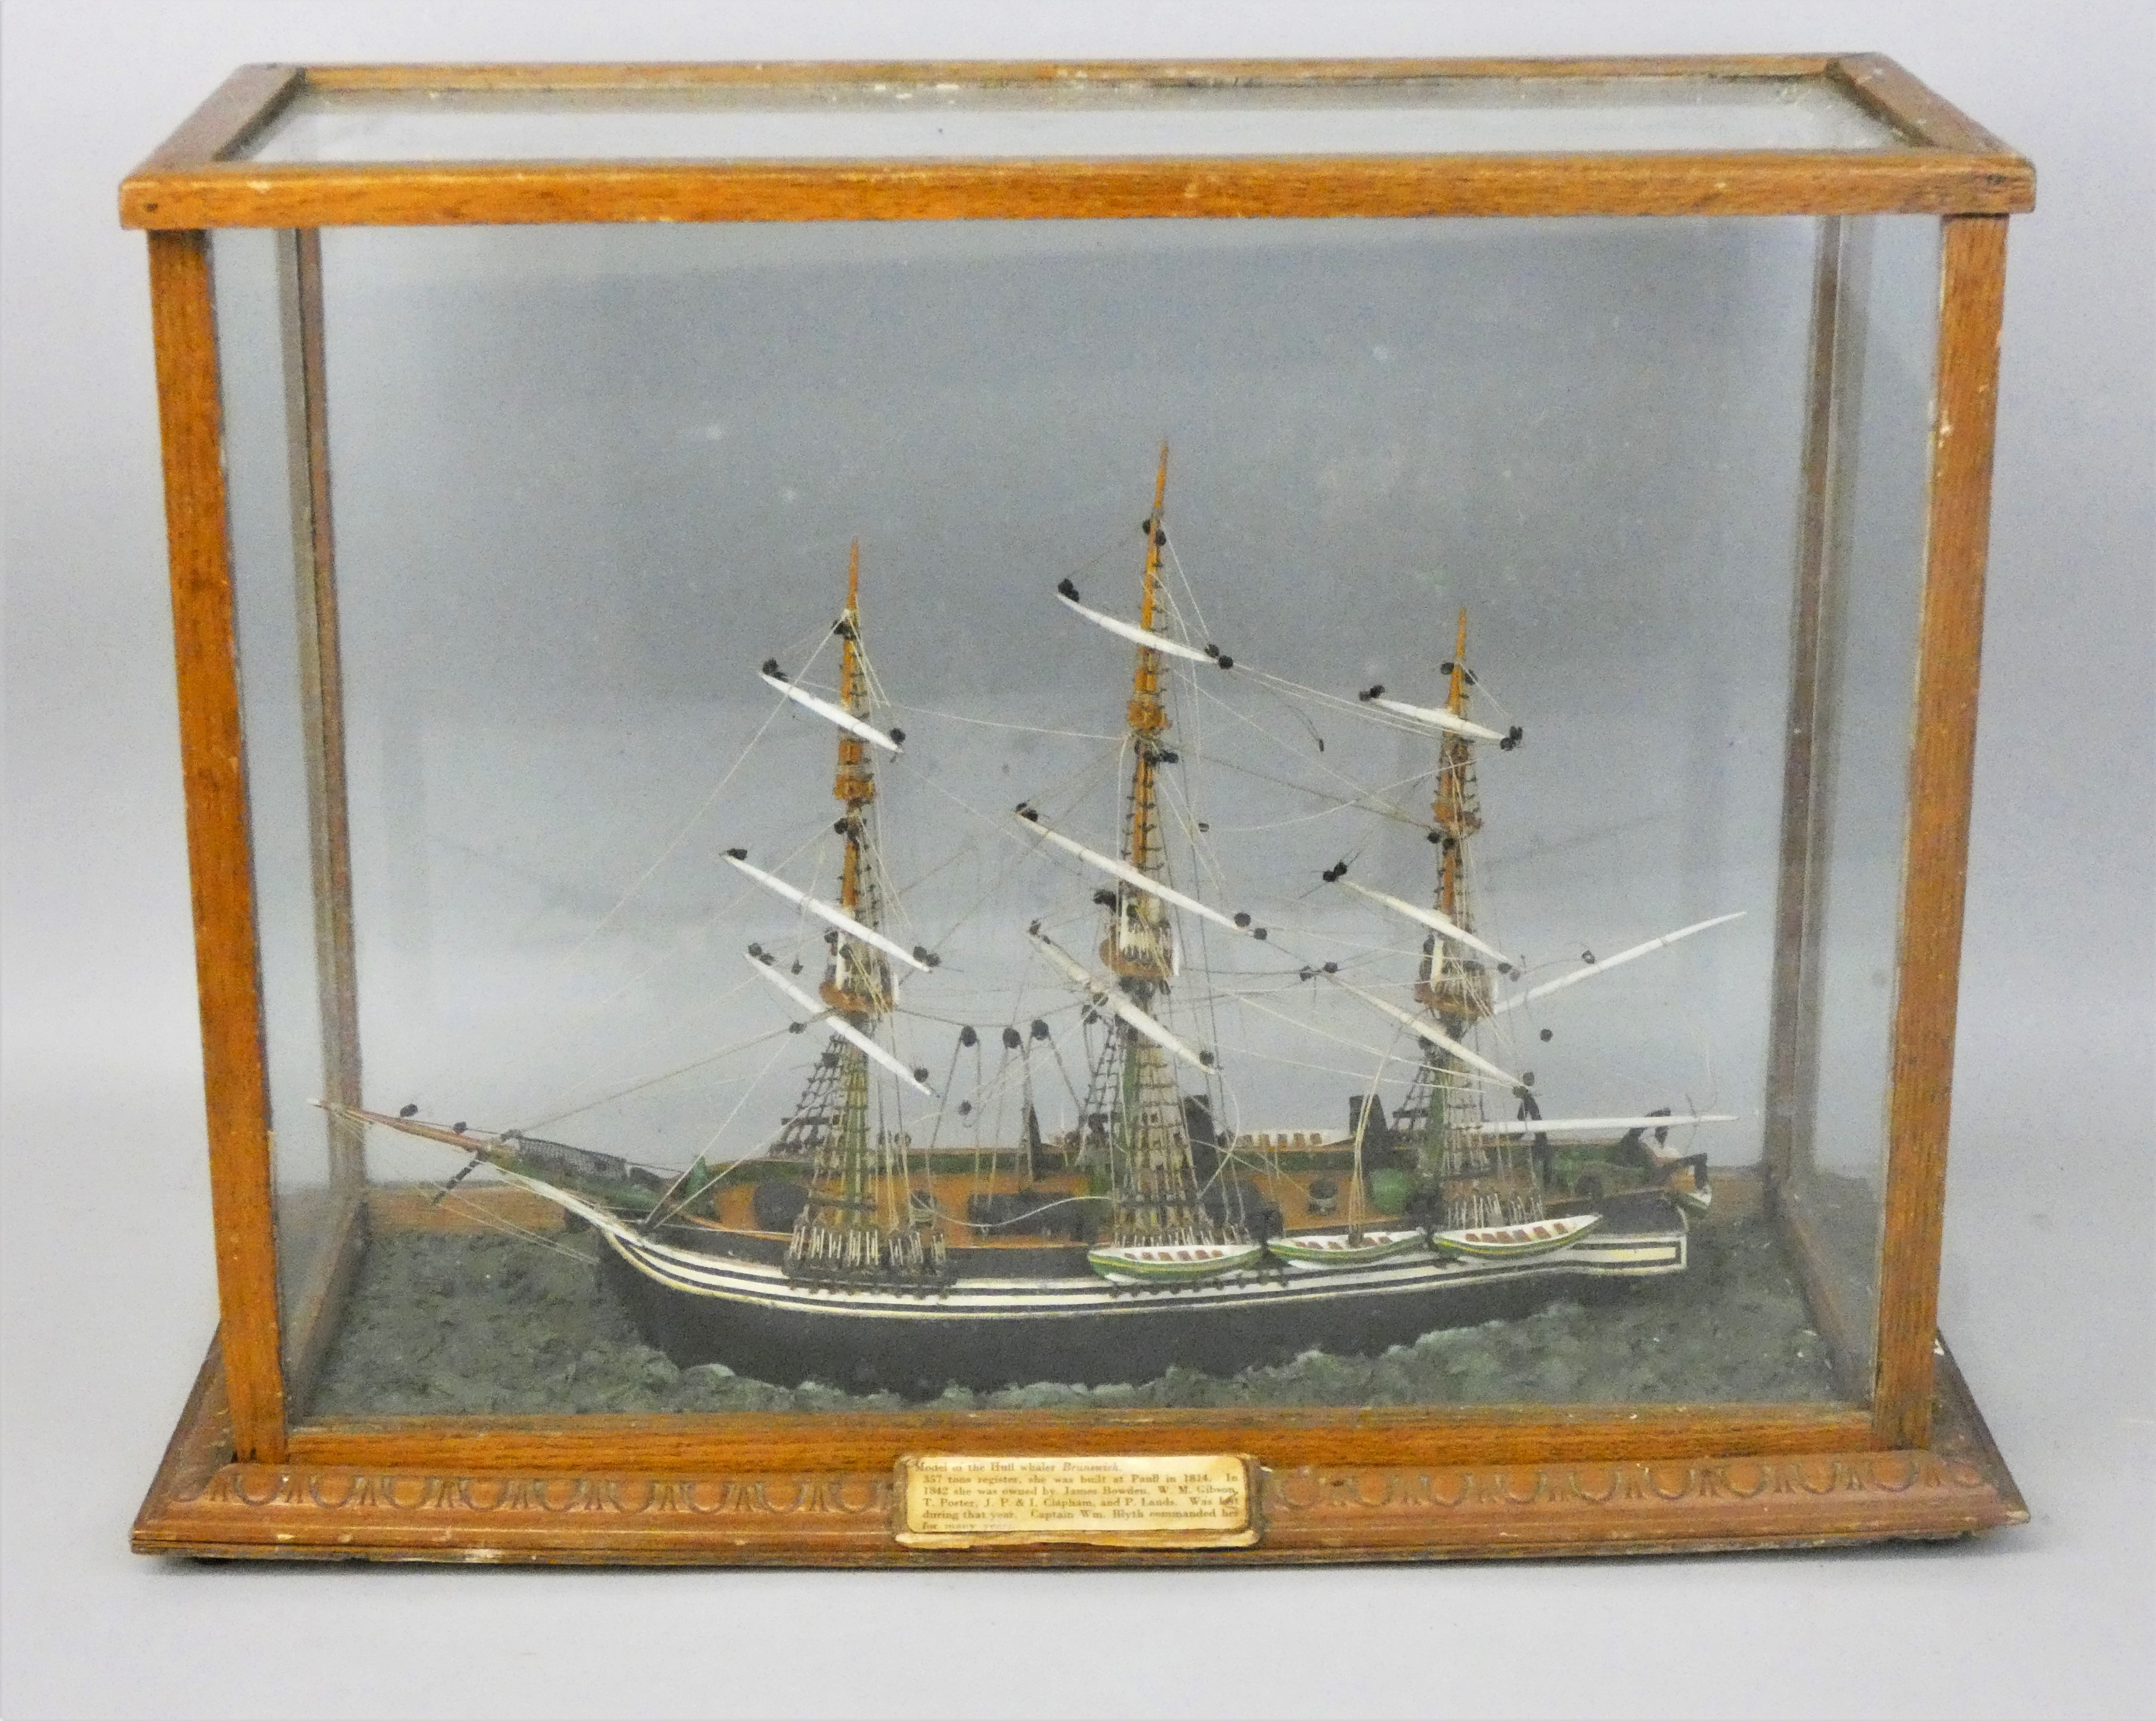 G. Pearson, Hull, a wooden scratch-built model of BRUNSWICK, a Hull whaler who led the Hull fleet to - Image 2 of 3